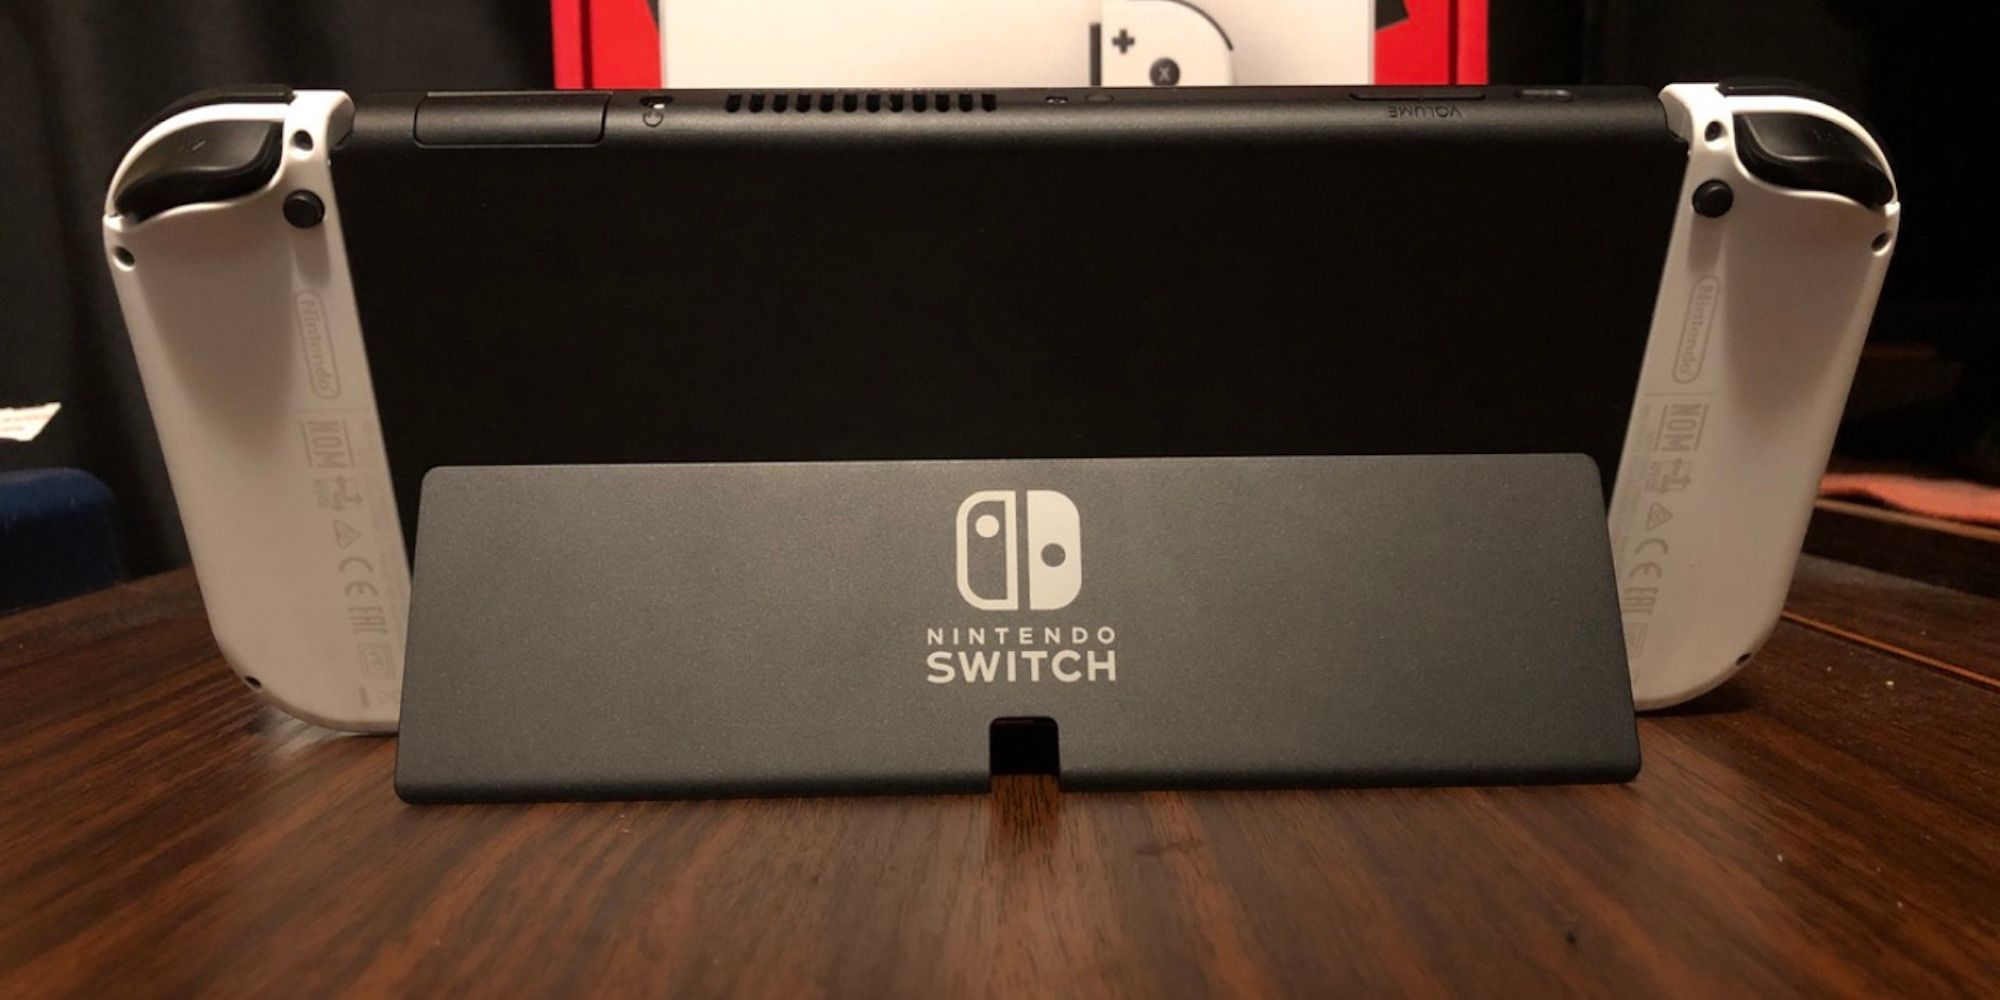 Switch OLED in kickstand mode